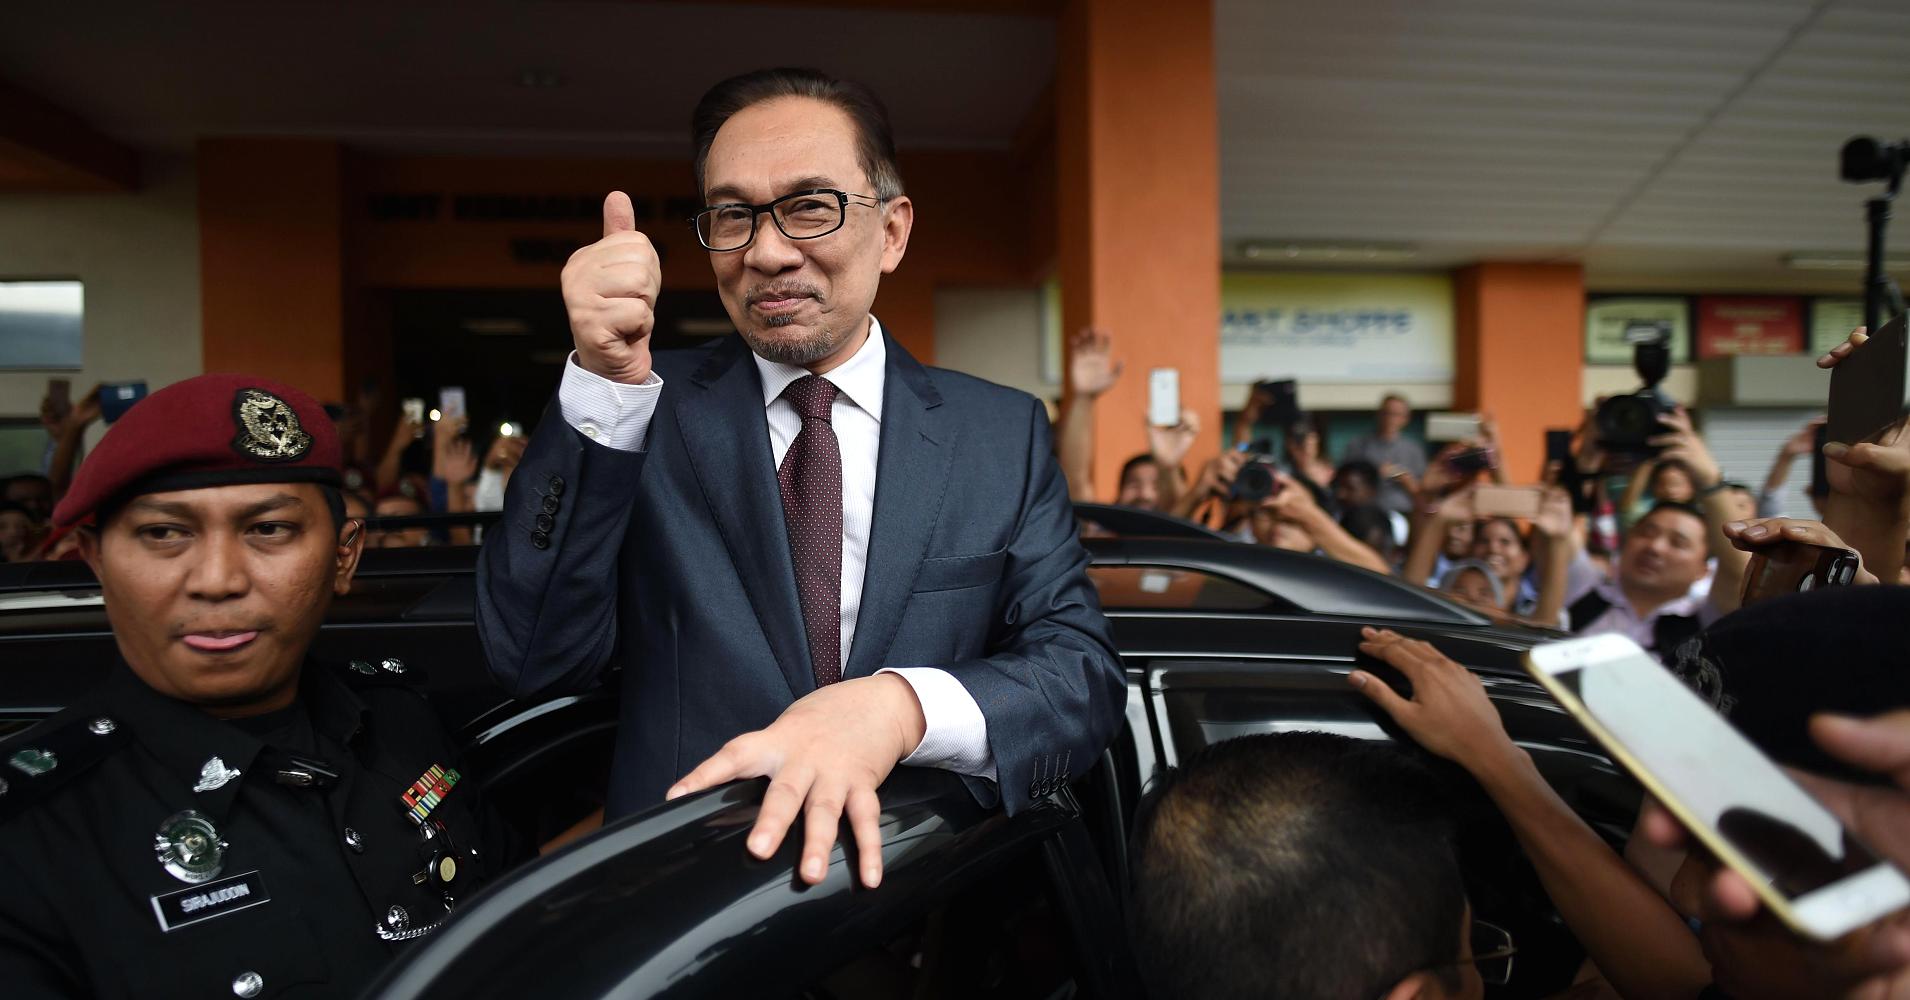 Malaysia election: Anwar Ibrahim to be released, may lead country